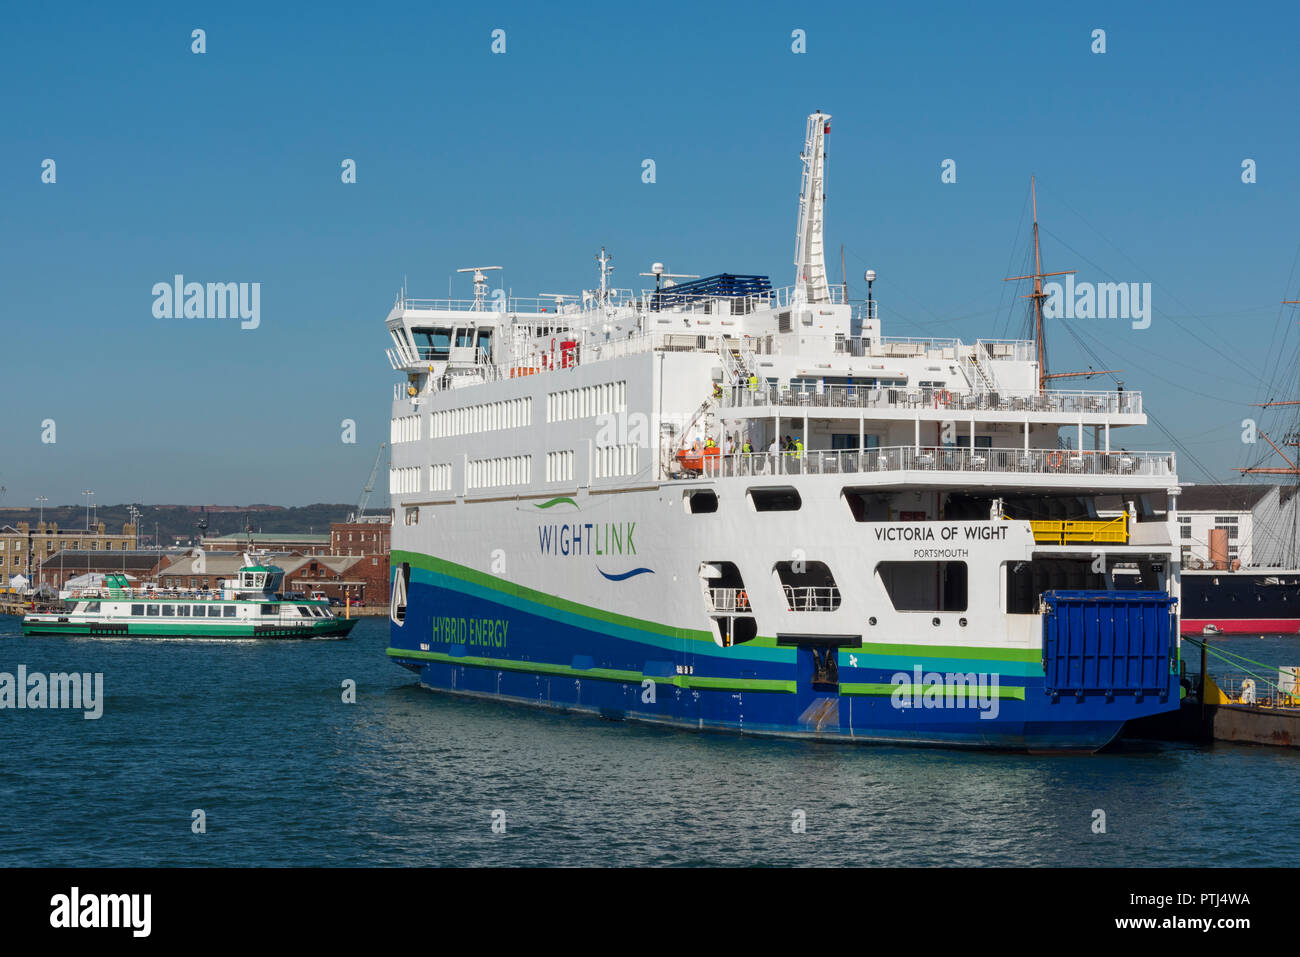 wightlink isle of wight hybrid powered energy efficient green ferry service to the isle of wight from Portsmouth harbour. Stock Photo